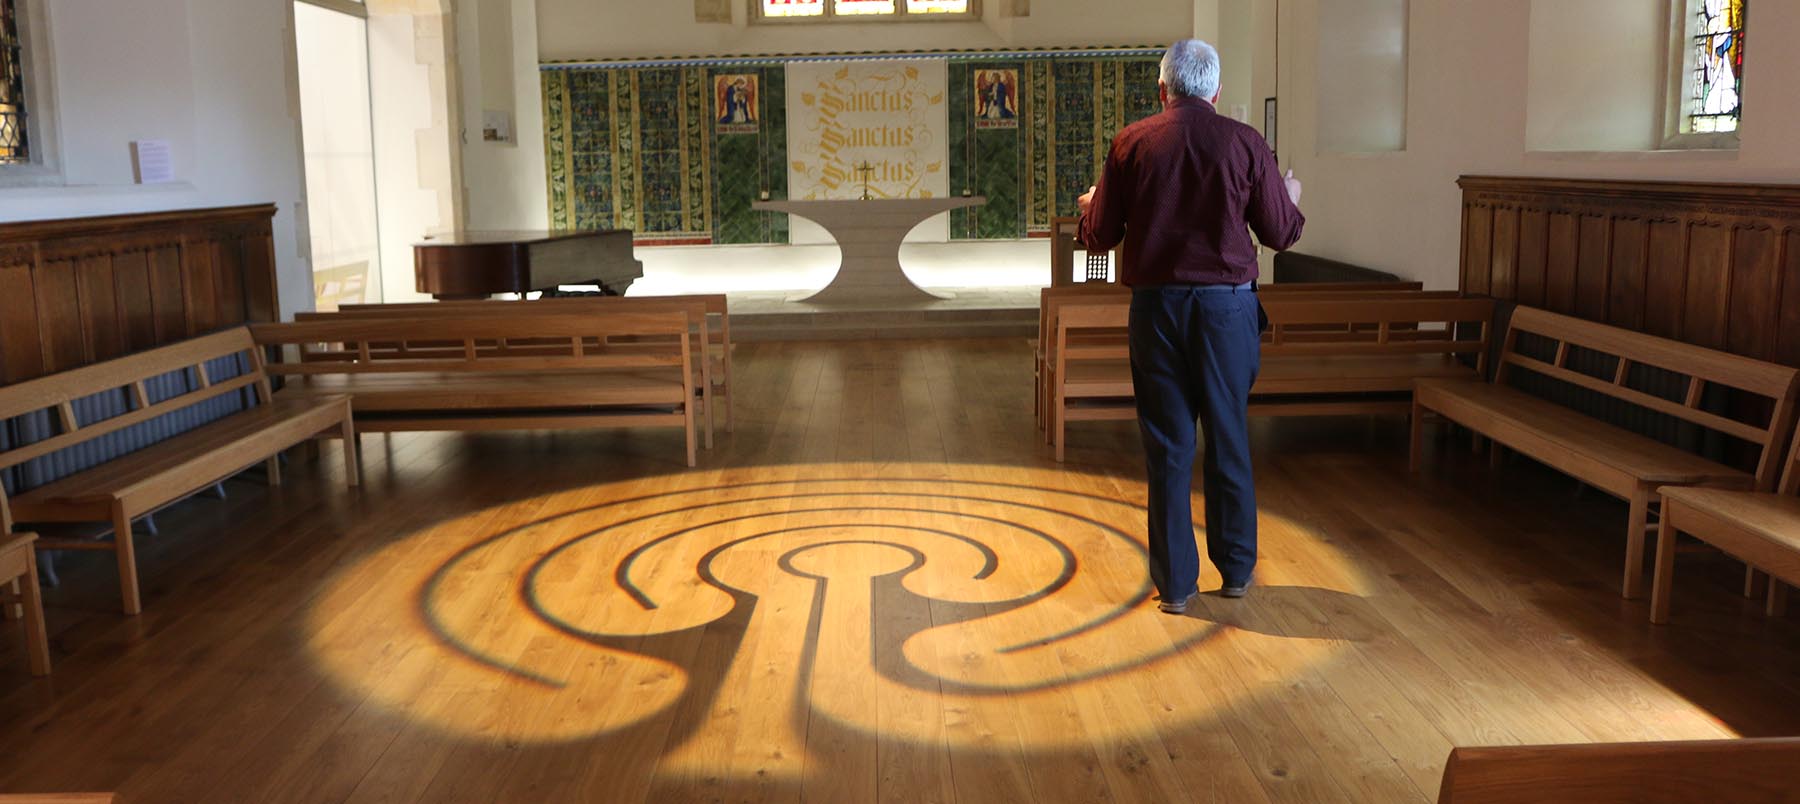 Light projection of a Labyrinth, a continuous line that weaves back on itself, on wooden floor of University of Winchester Chapel